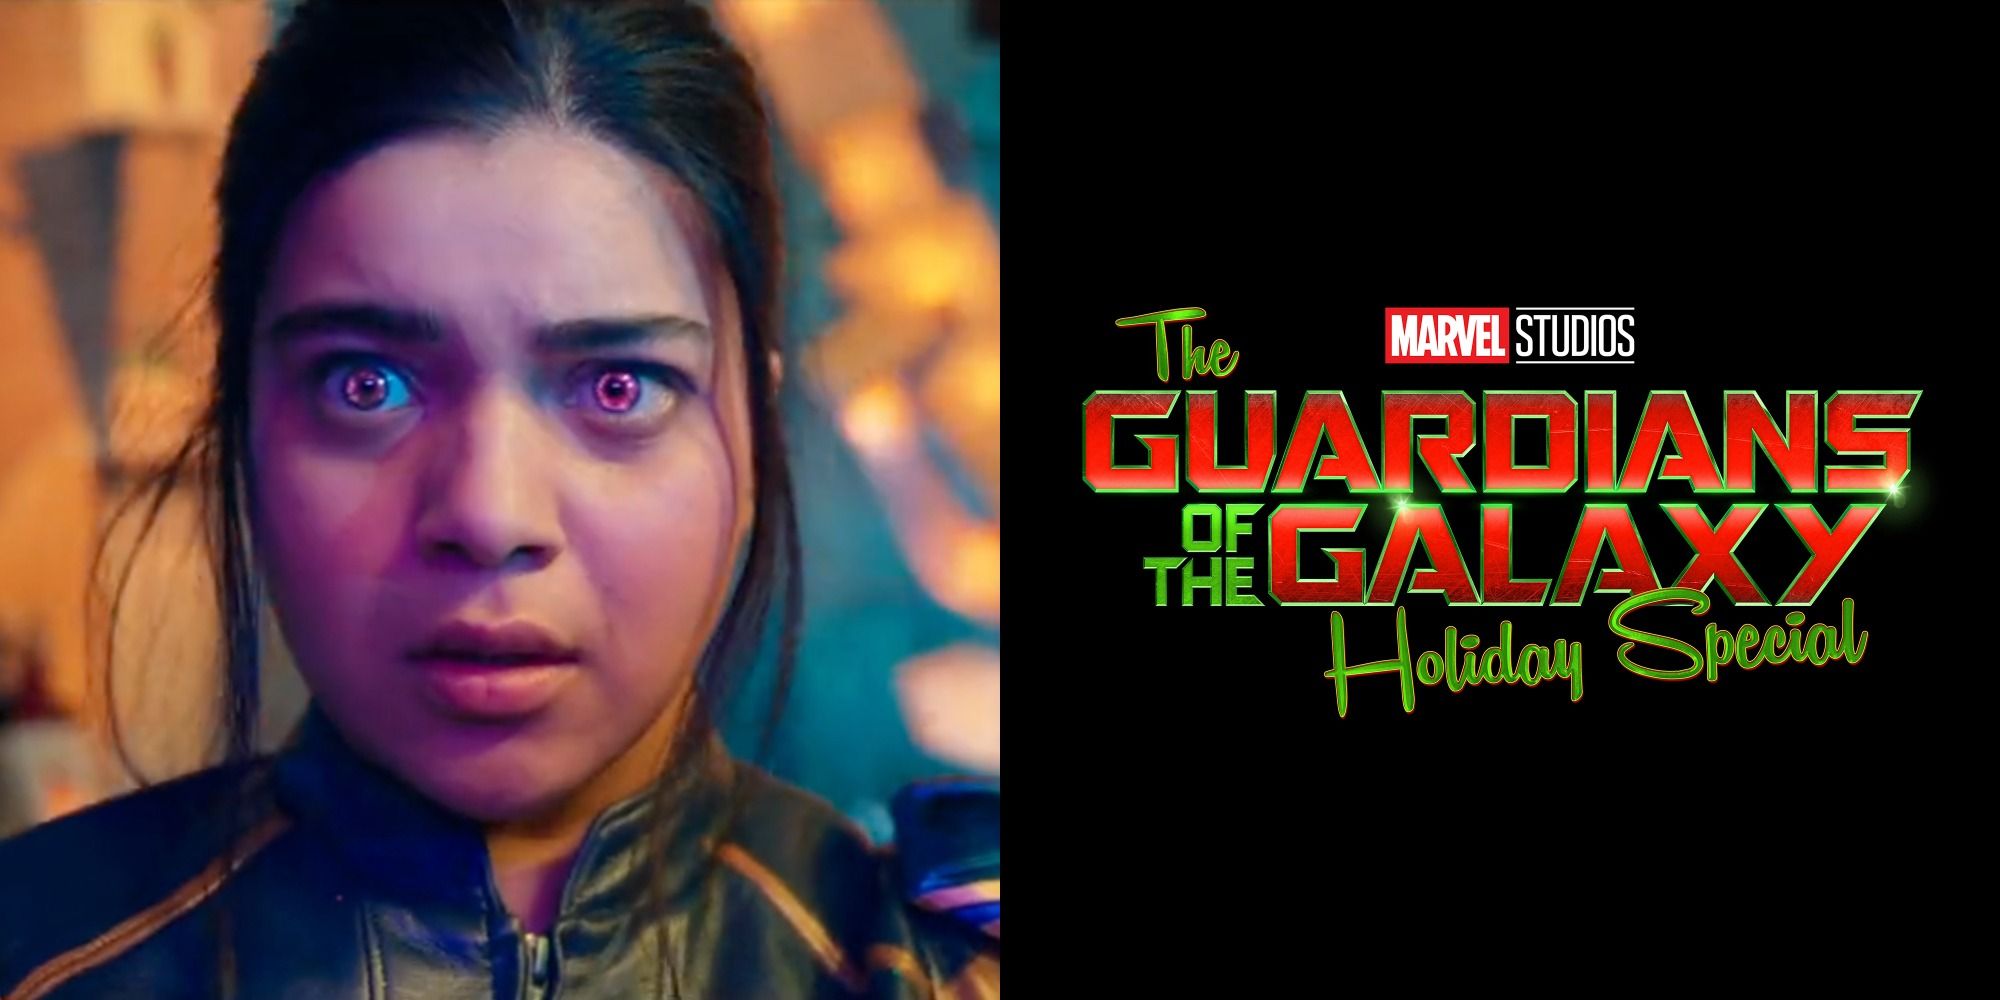 Split image showing Ms. Marvel and the logo for The Guardians Holiday Special.